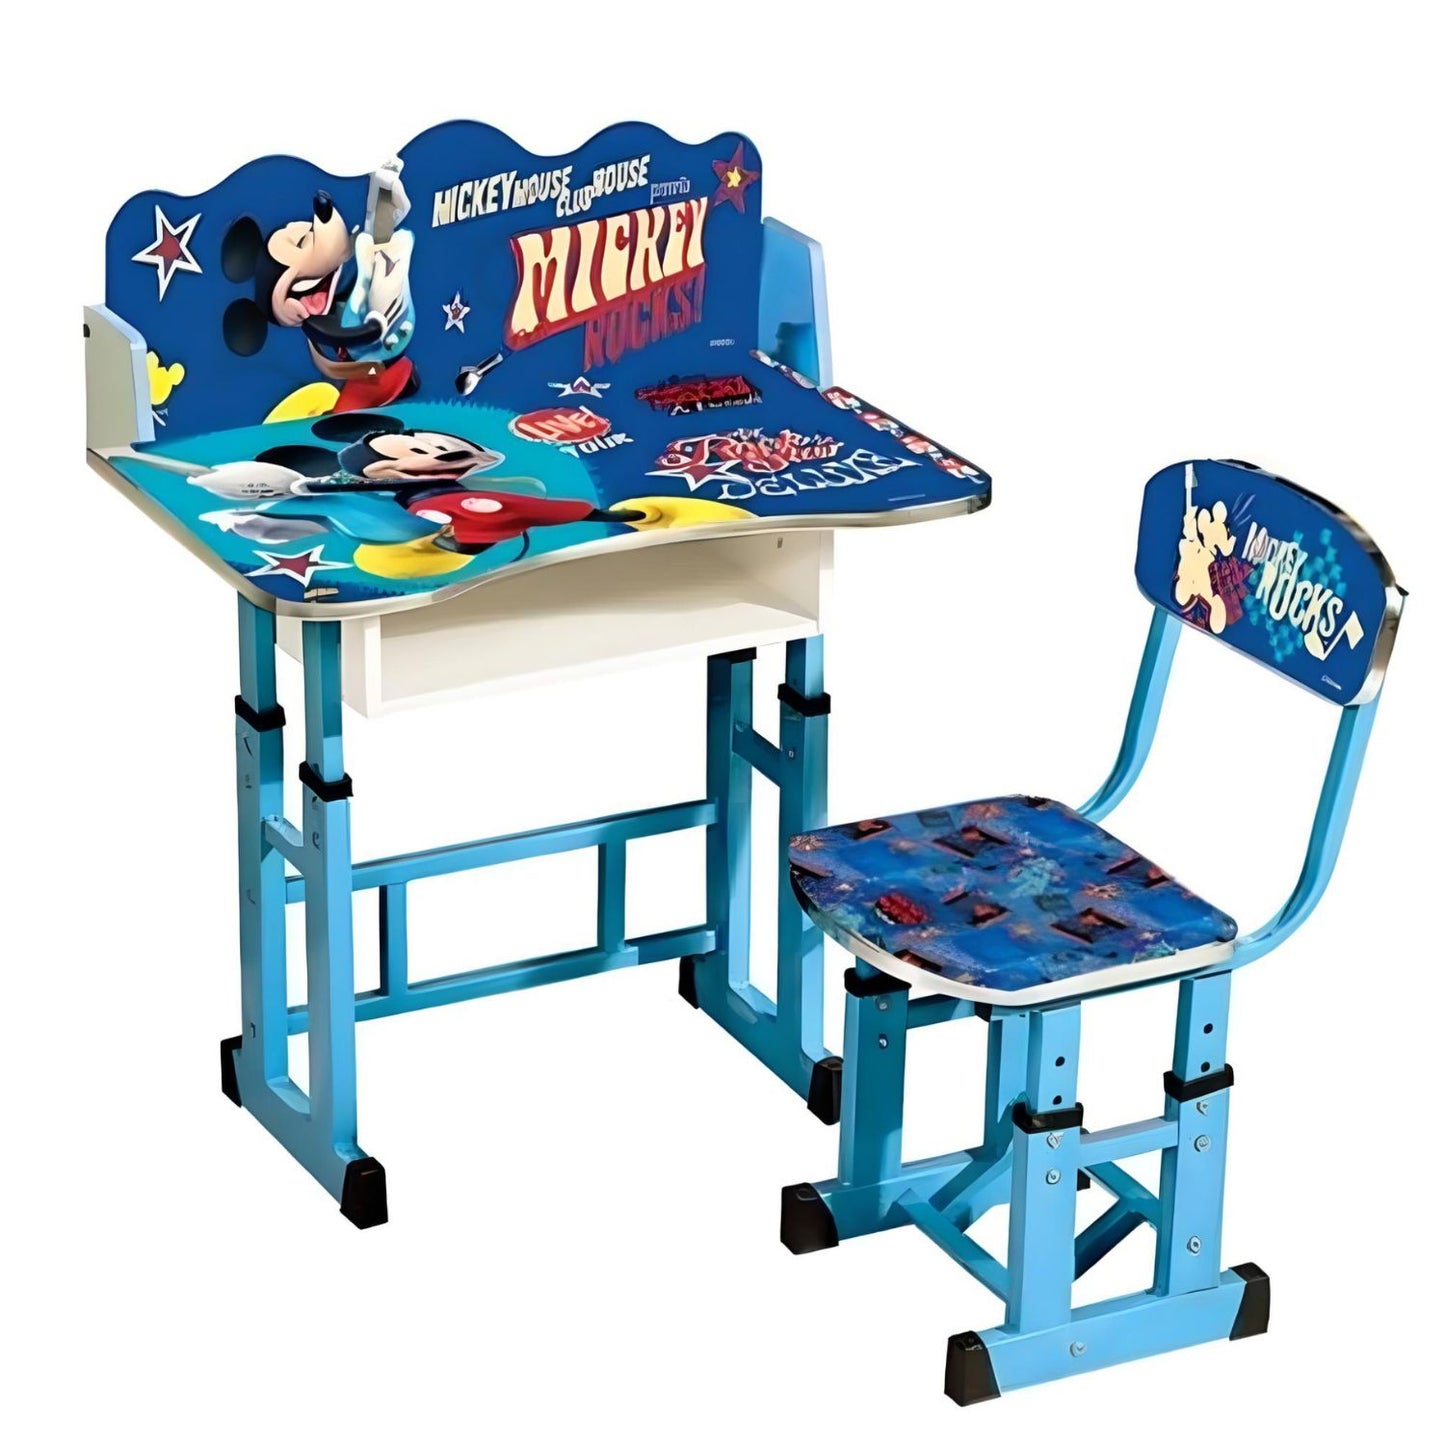 MM Toys Adjustable Multipurpose Wooden Table Chair Set - Ideal Study Table for Kids (3-14 years) with Alloy Frame, Safety Design, and Built-in Time Clock - Blue (Design May vary)